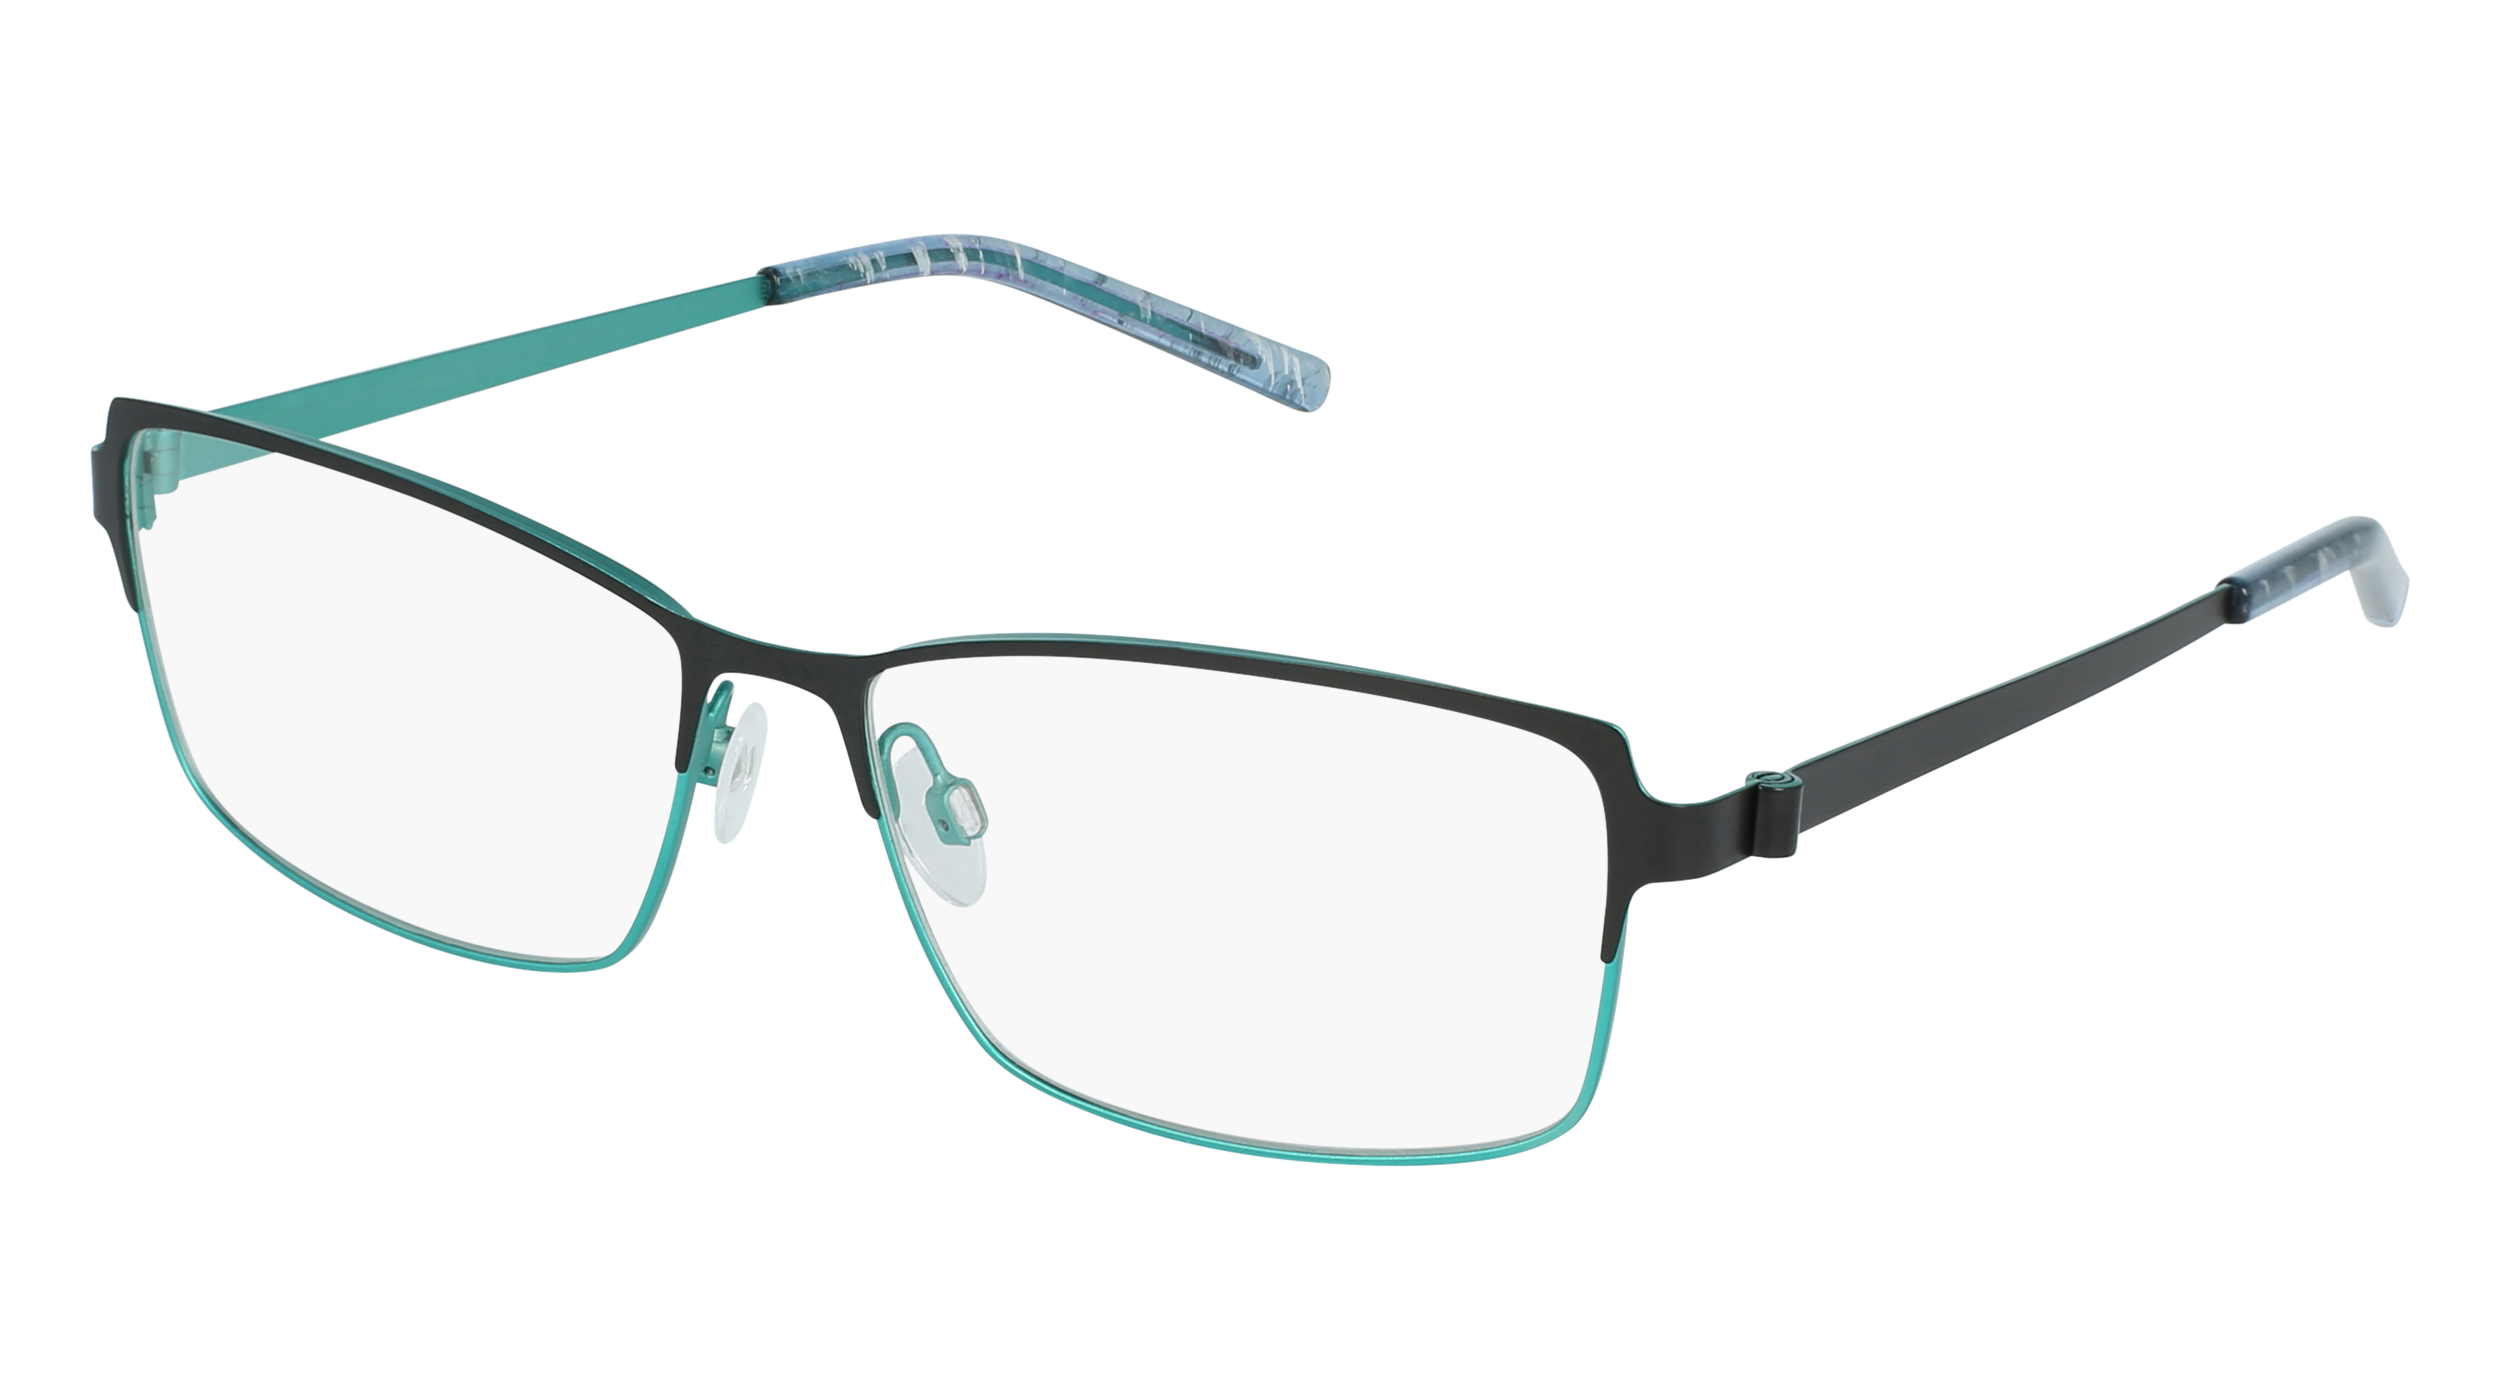 a AN 200 women's eyeglasses (from the side)